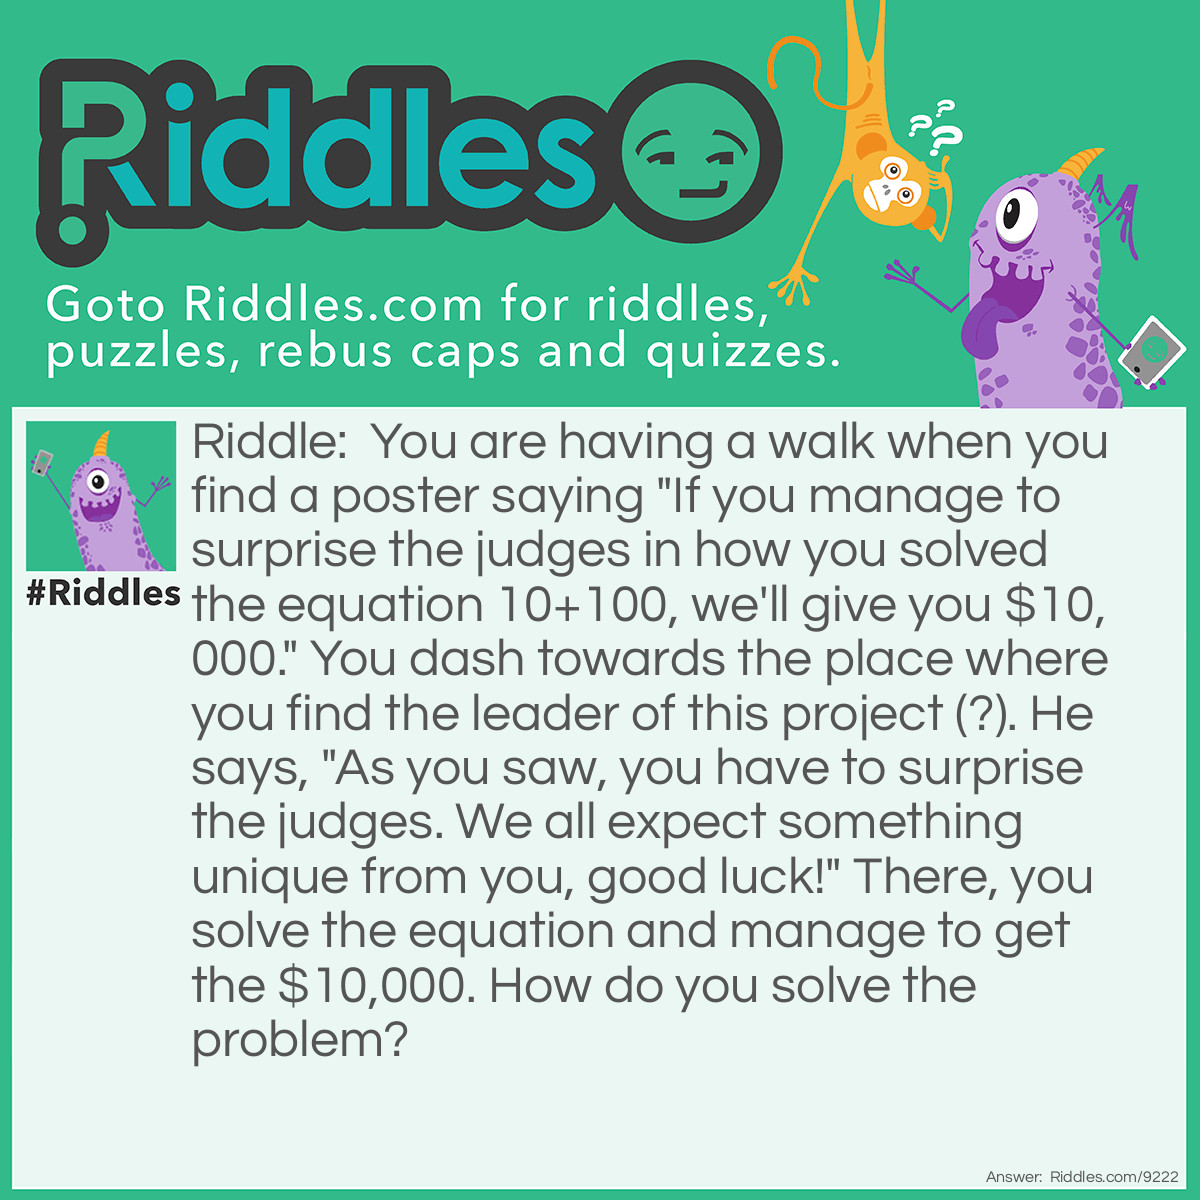 Riddle: You are having a walk when you find a poster saying "If you manage to surprise the judges in how you solved the equation 10+100, we'll give you $10,000." You dash towards the place where you find the leader of this project (?). He says, "As you saw, you have to surprise the judges. We all expect something unique from you, good luck!" There, you solve the equation and manage to get the $10,000. How do you solve the problem? Answer: You solve the problem normally (in your head, vertical/horizontal equation, everything else that EVERYONE knows). The reason is that the man said, "We all expect something unique from you." And if you expect something very unique from someone, you don't get surprised no matter how unique it is (Unless it's super, super unique, and there isn't a lot of "unique" ways of solving 10+100). Because they are EXPECTING something unique, if you just do it the normal way, they will be surprised as you literally ignored their expectations of "Something Unique"!